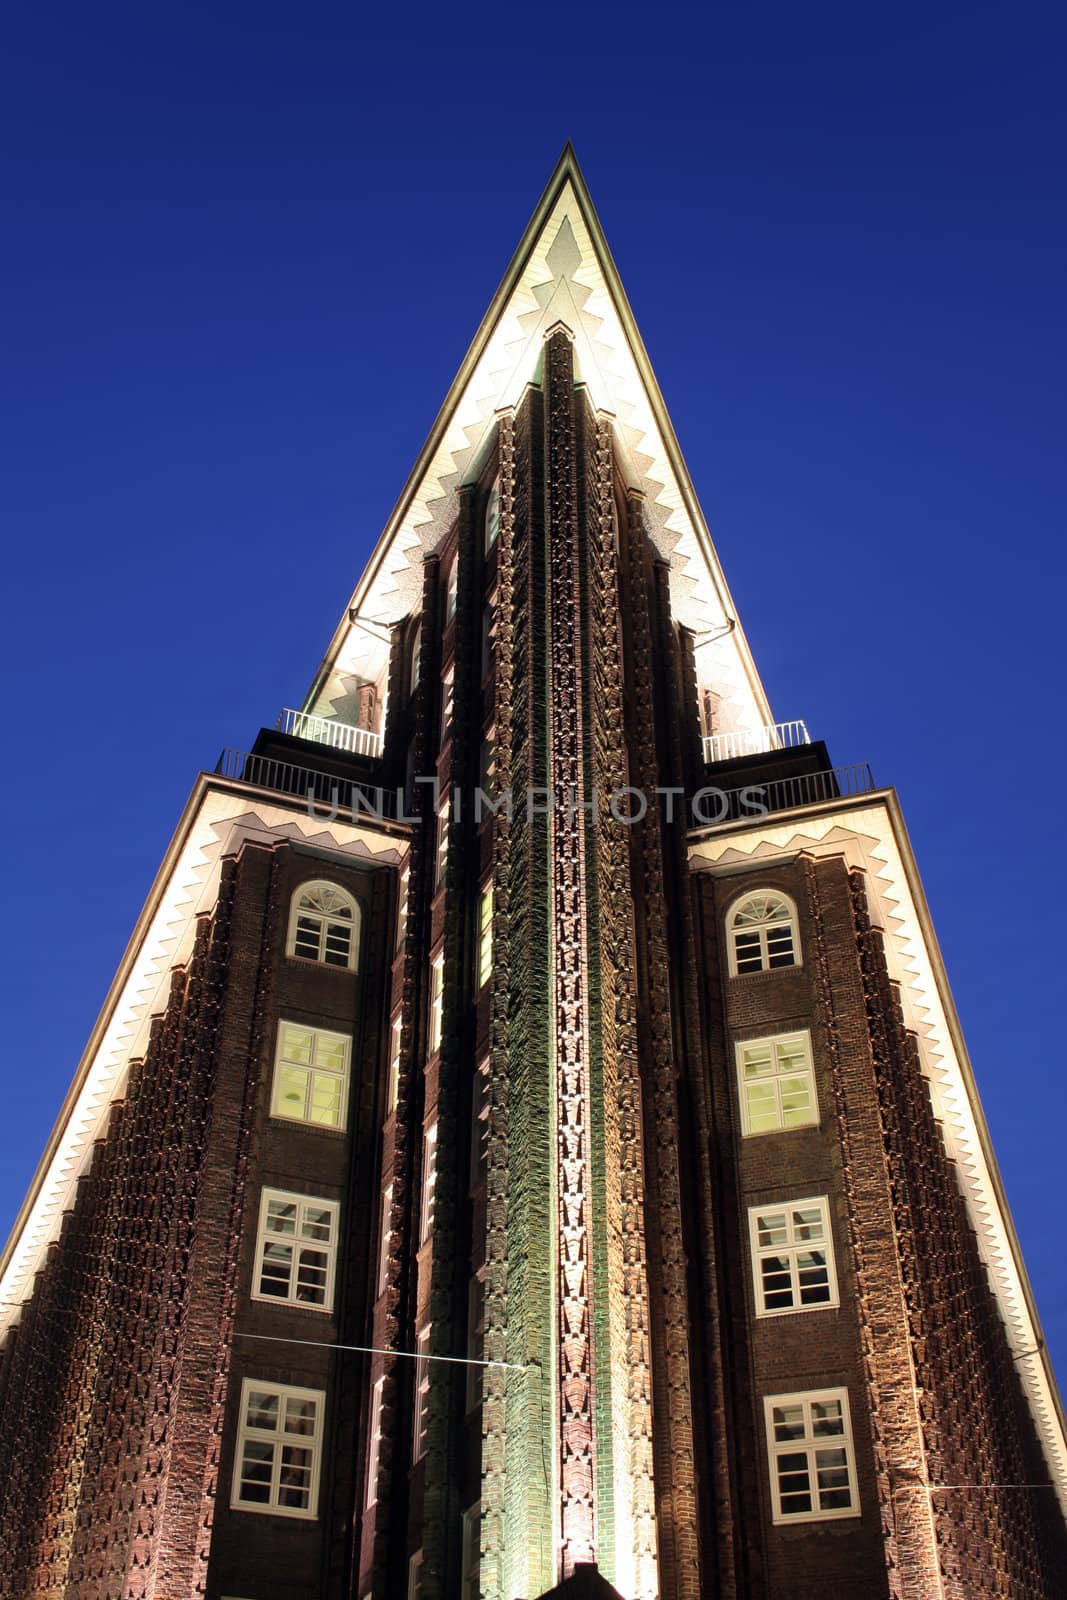 Illuminated office building at dusk during blue hour, Hamburg, Germany. Chilehaus, beautiful example of the Backsteinexpressionismus of the 1920s.